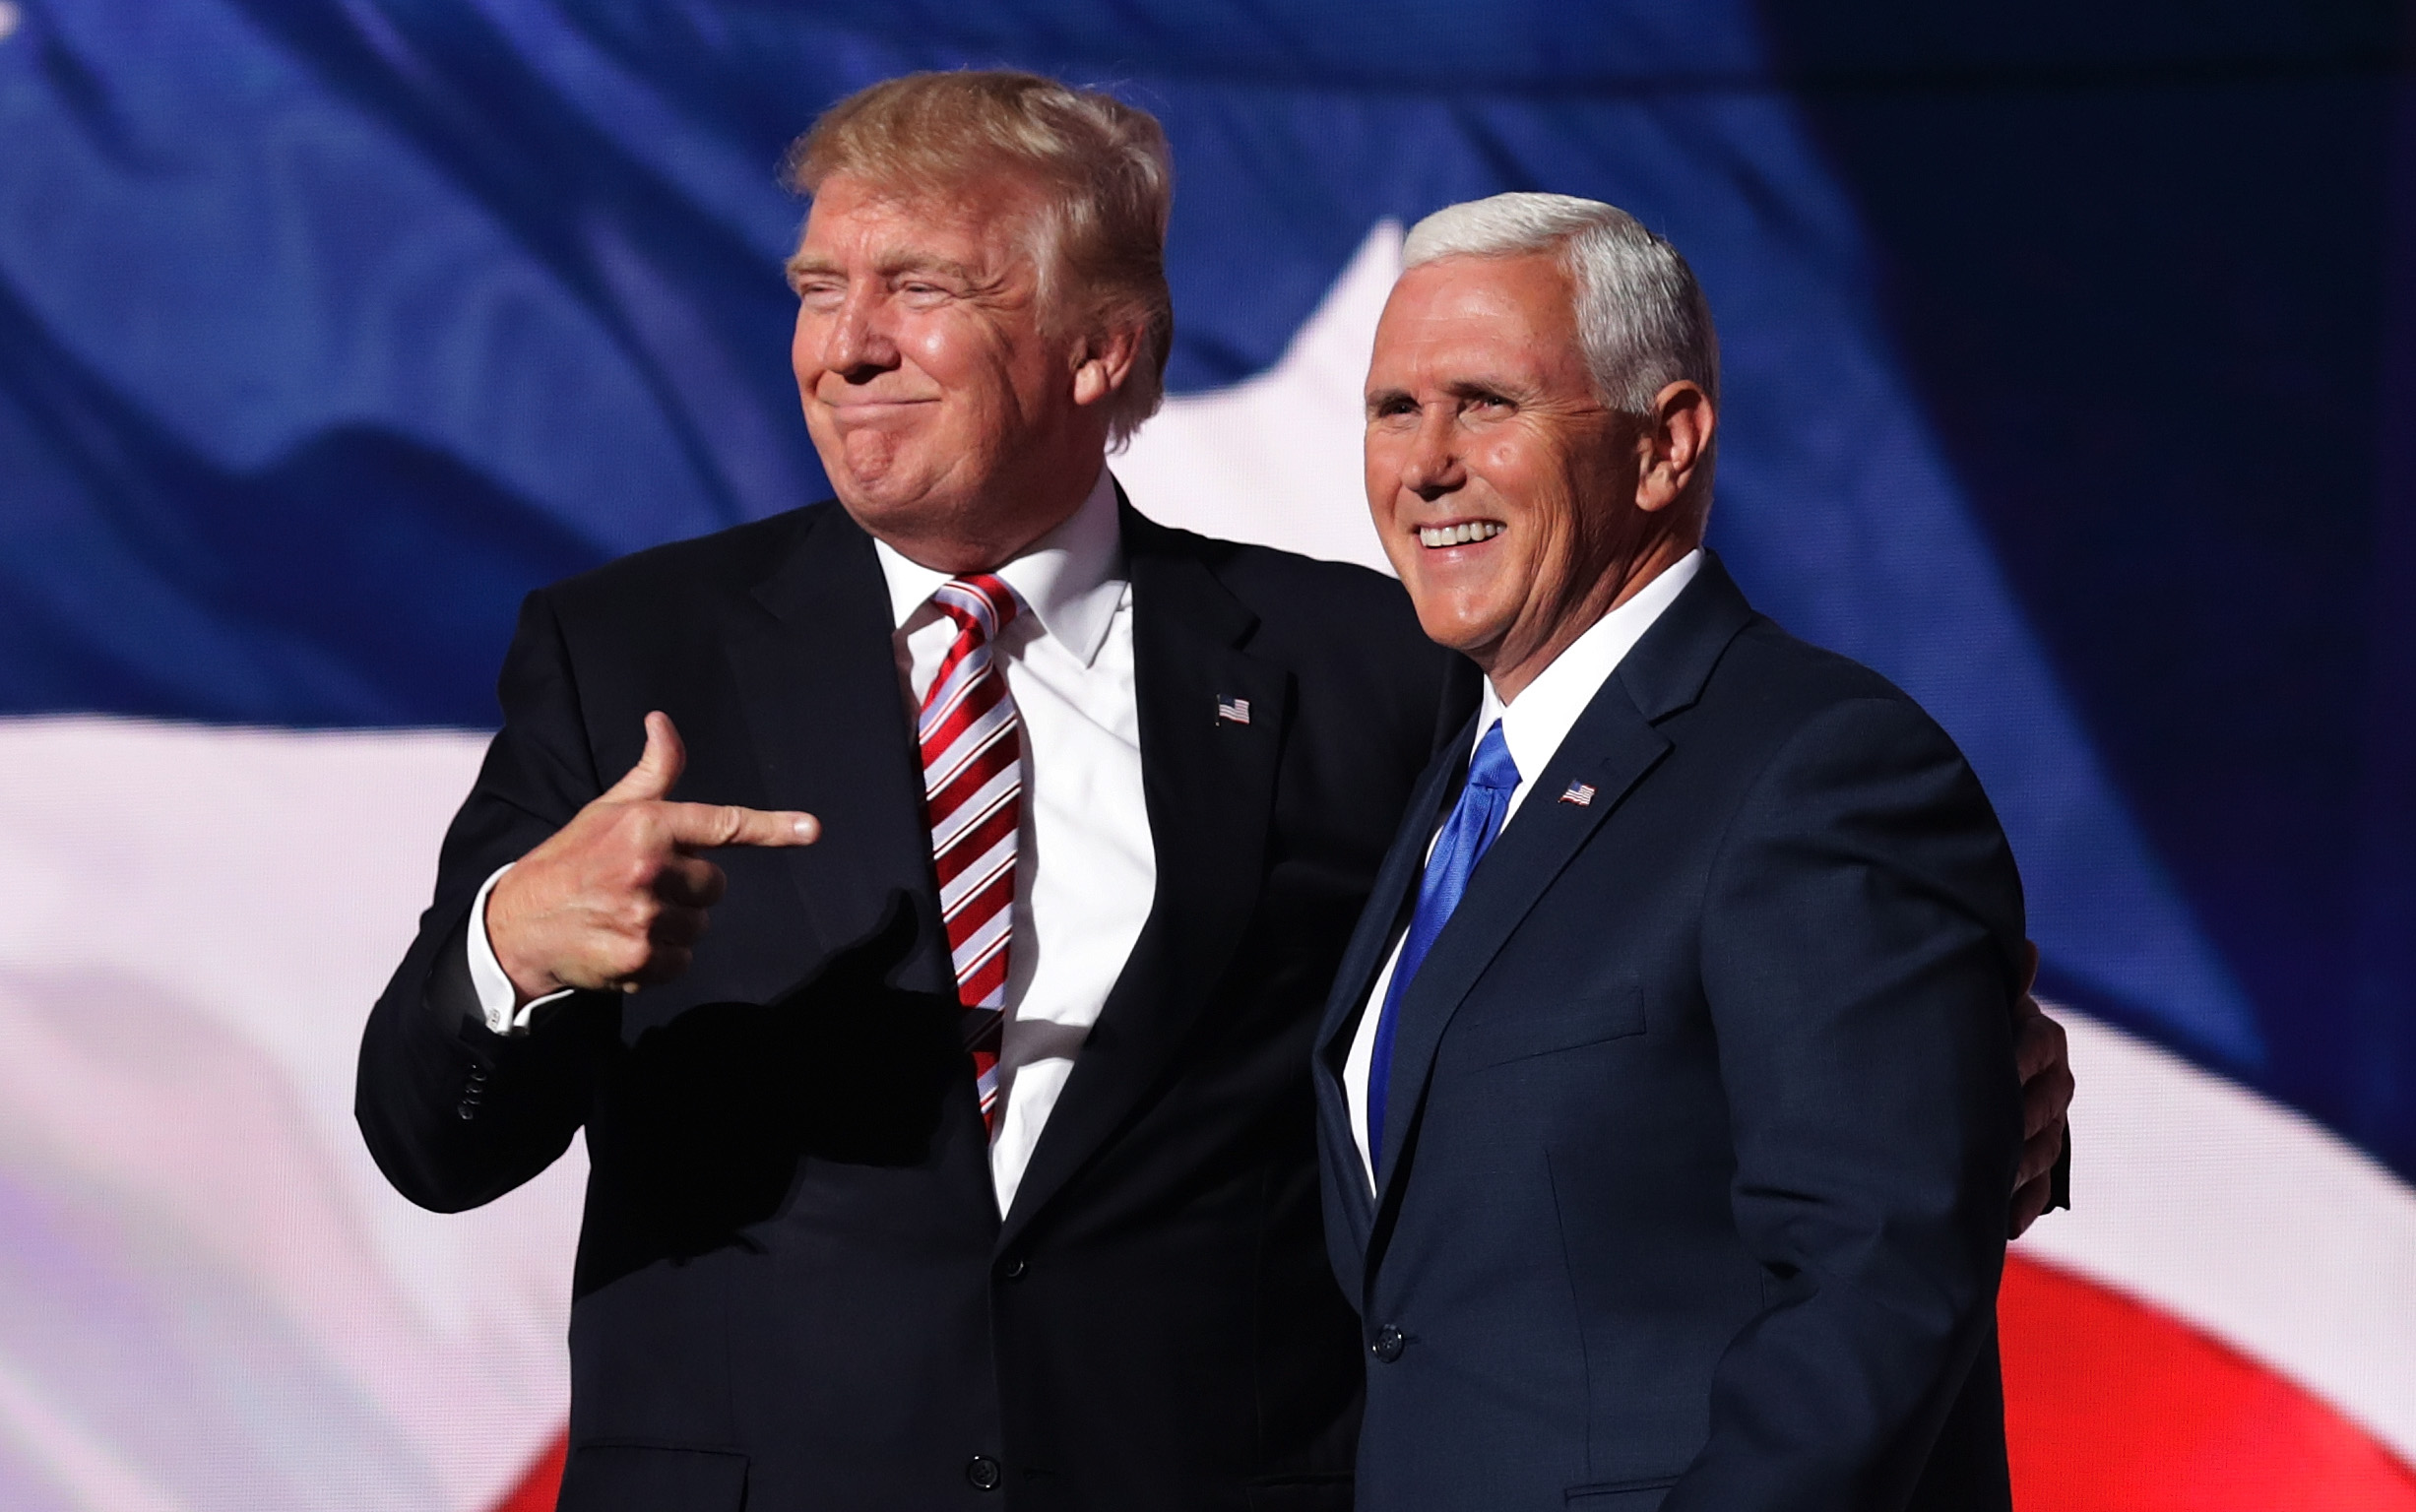 Then-GOP presidential candidate Donald Trump stands with Mike Pence at the Republican National Convention in Cleveland, Ohio. (Chip Somodevilla—Getty Images)